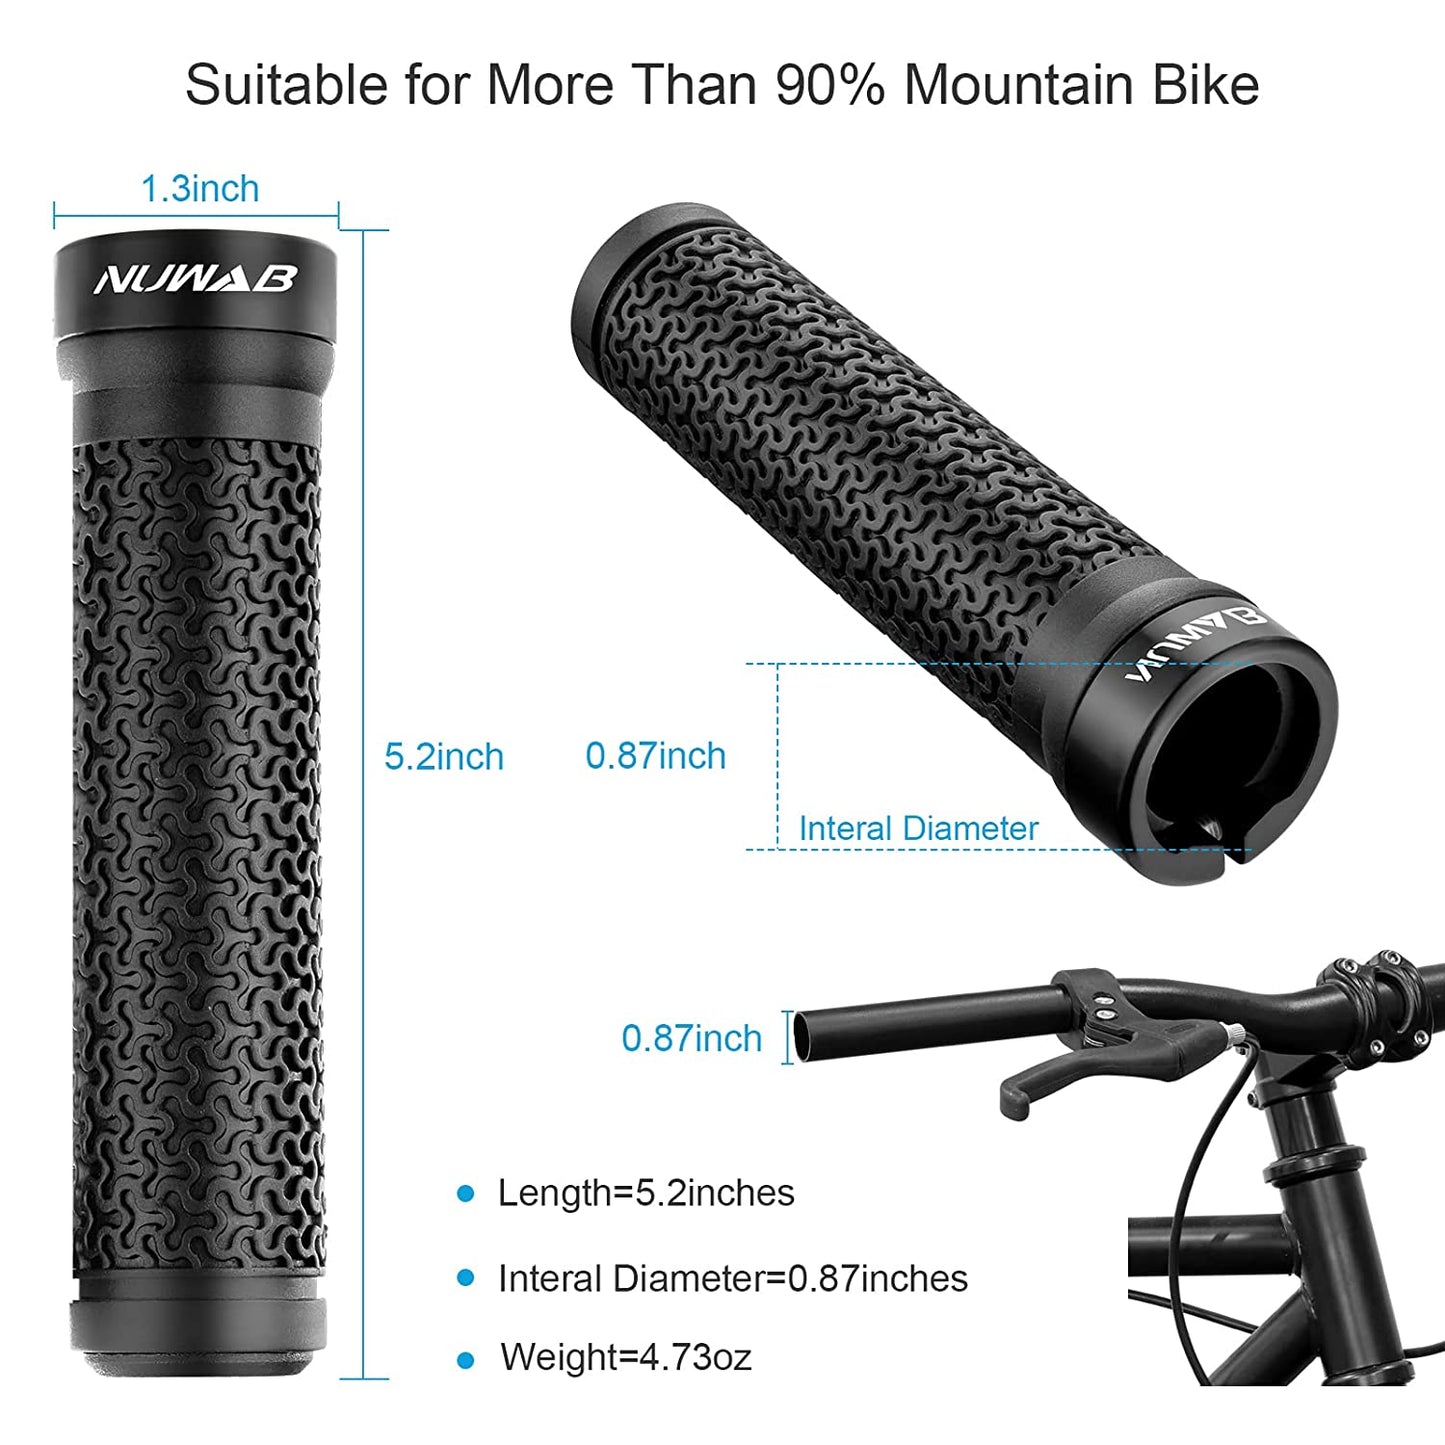 Premium Bike Handlebar Grips, Professional Mountain Bicycle Grips with Soft Anti-Slip Rubber, Single Lock-On Bike Handlebar, 2PCS Allen Wrench Come With